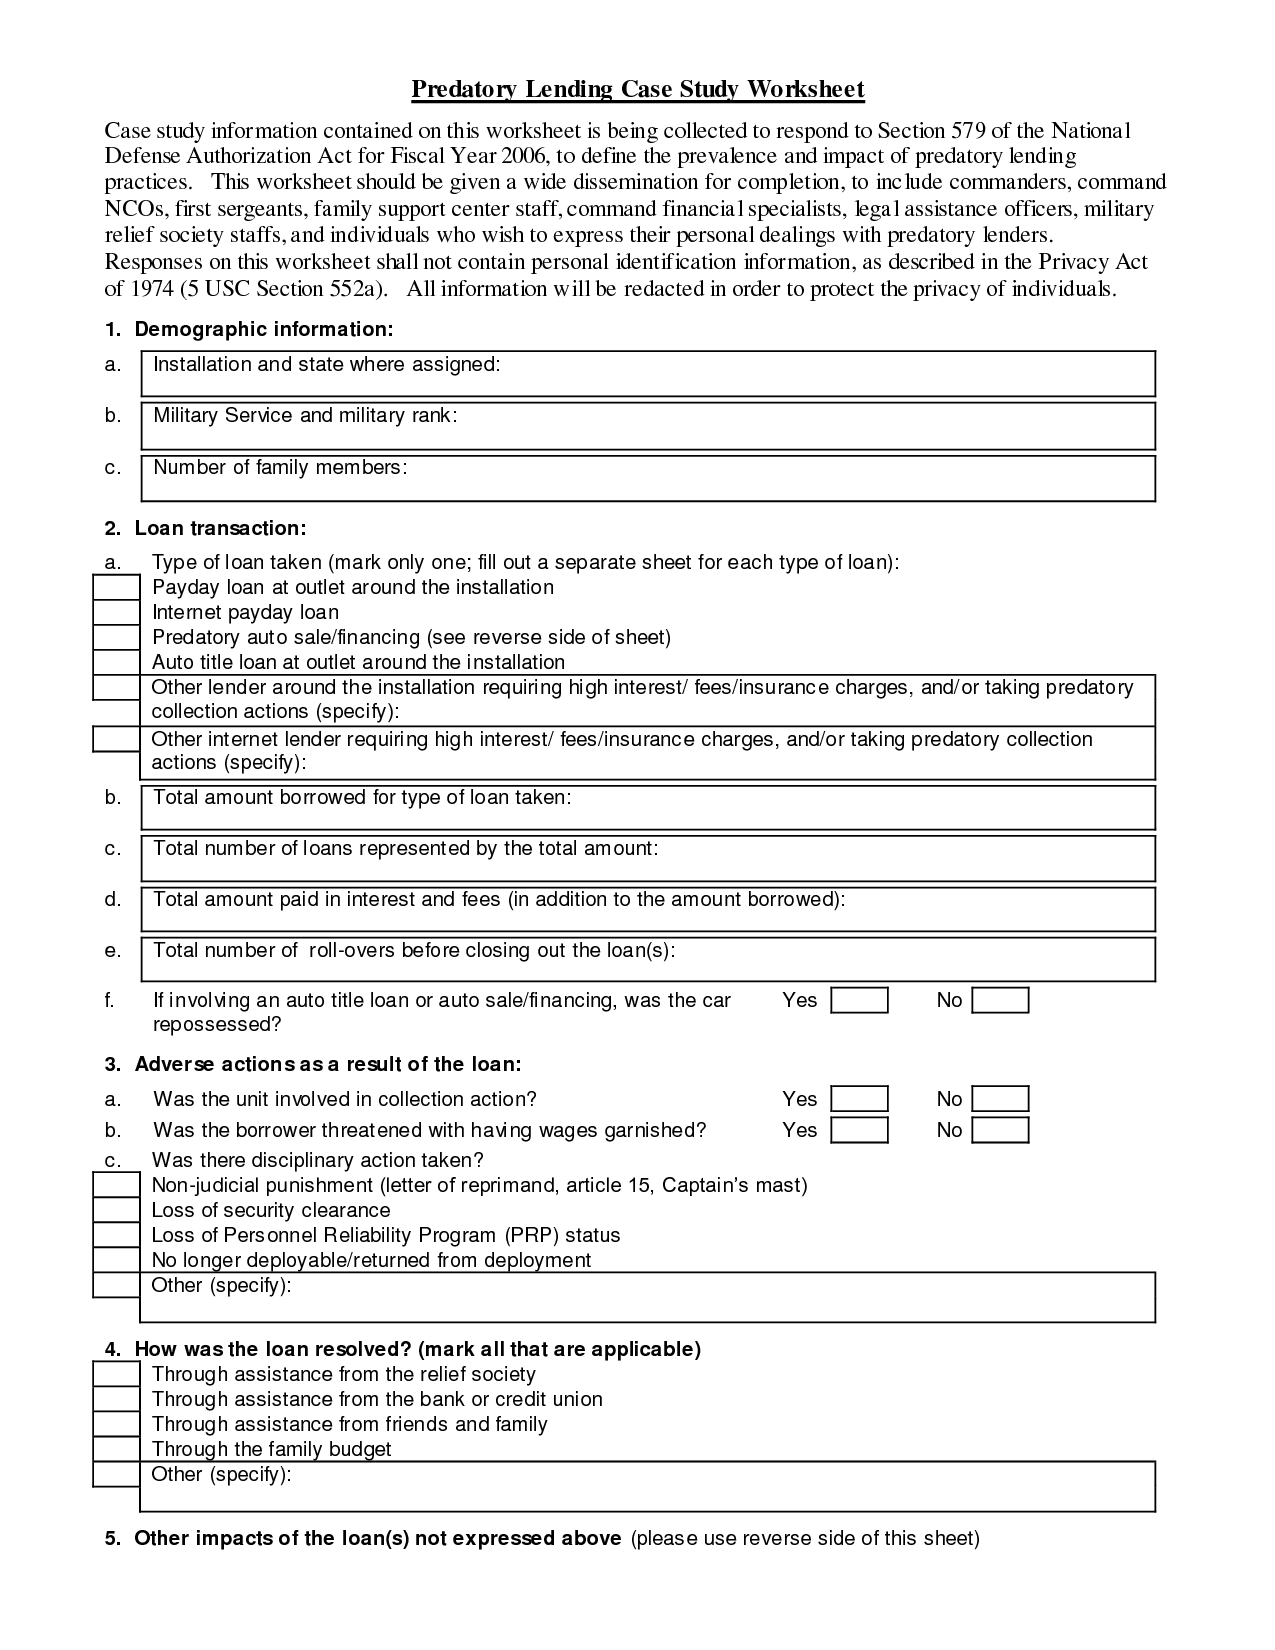 car loan repayment agreement template free loan agreement form 